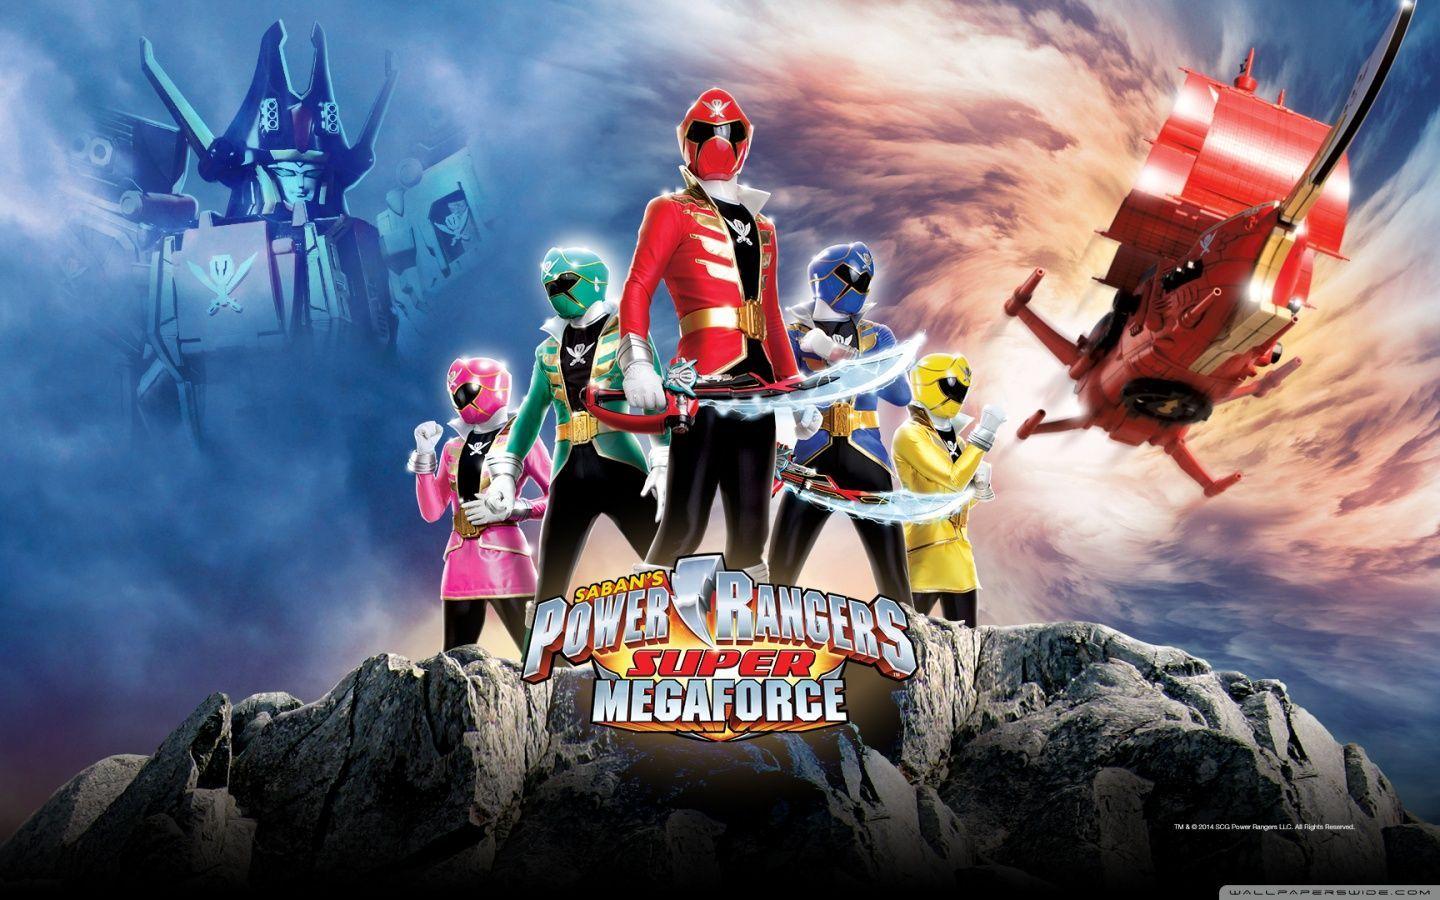 Power Ranger Wallpapers found on Google Images, would love to see all 6 in  1 wallpaper!!! : r/powerrangers